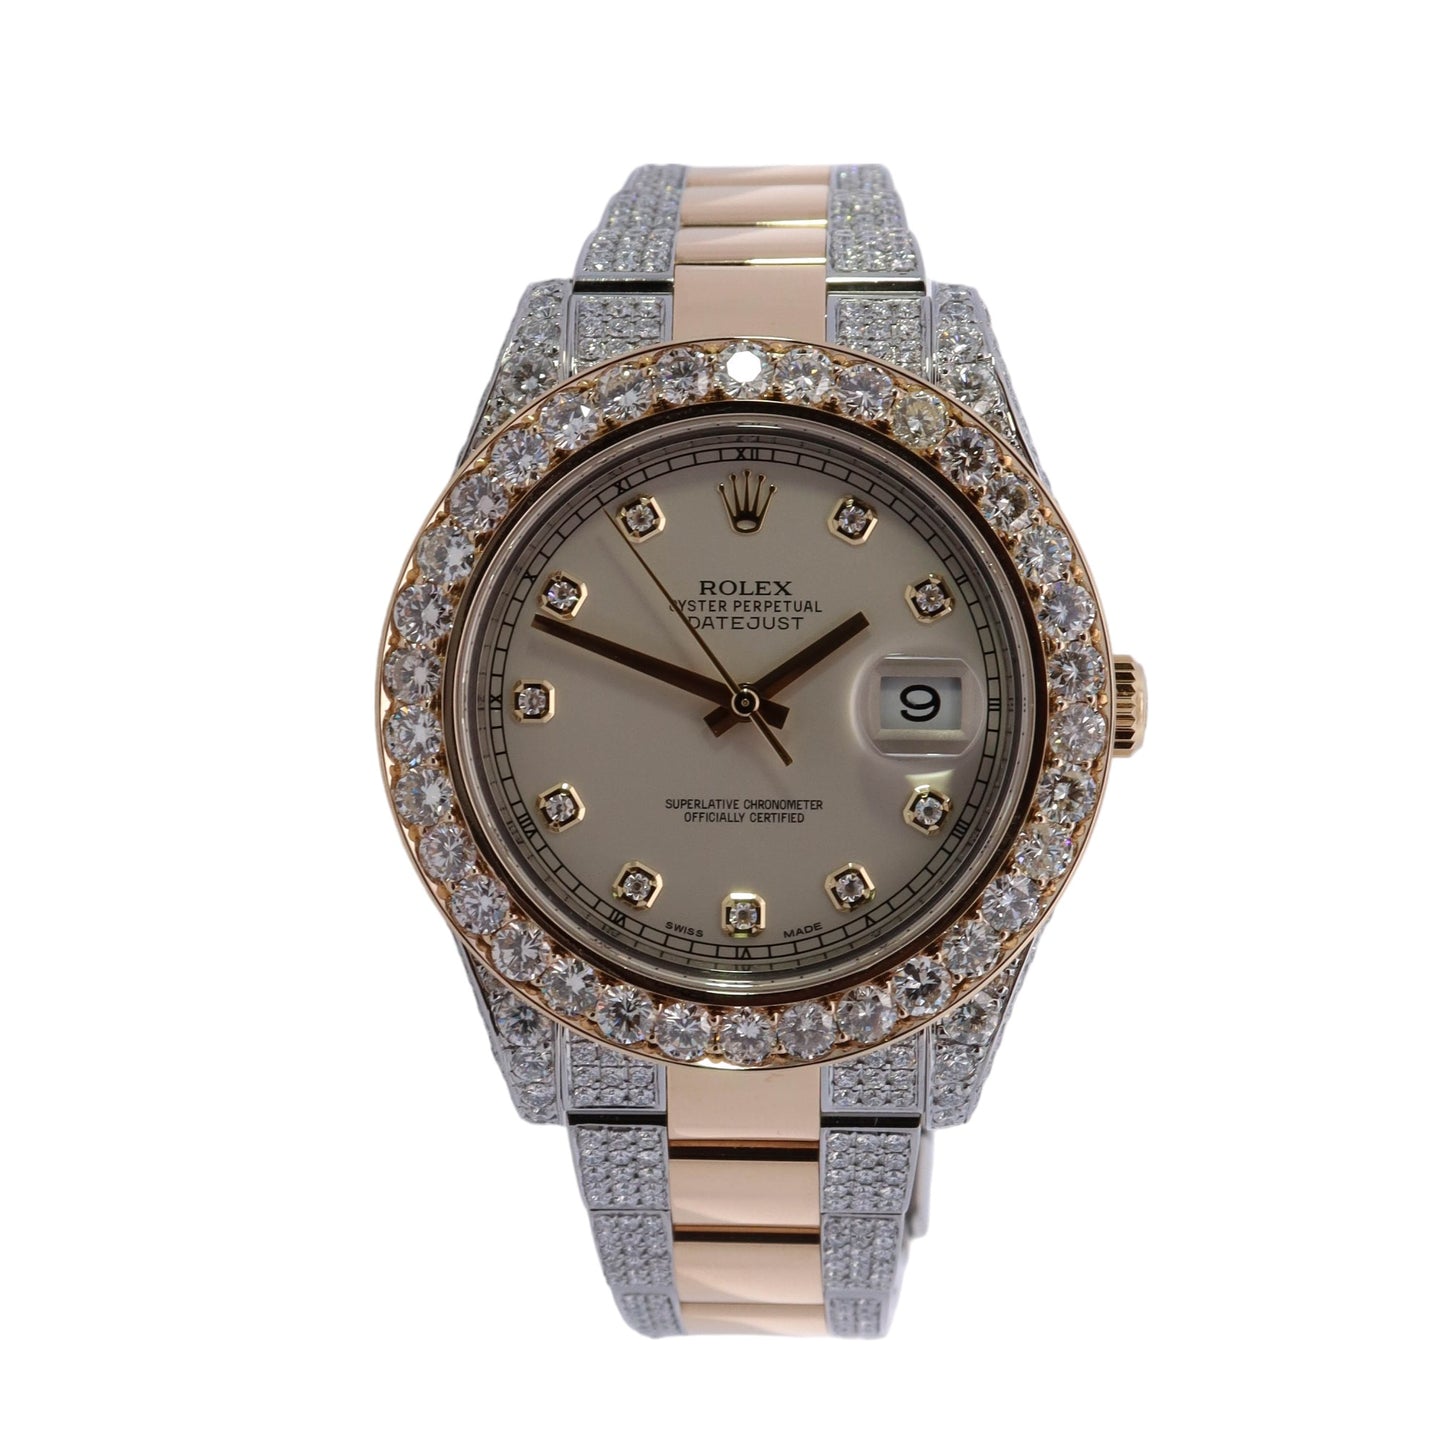 Rolex Datejust II Two Tone Yellow Gold & Steel 41mm Ivory Diamond Dial Watch Reference #: 116333